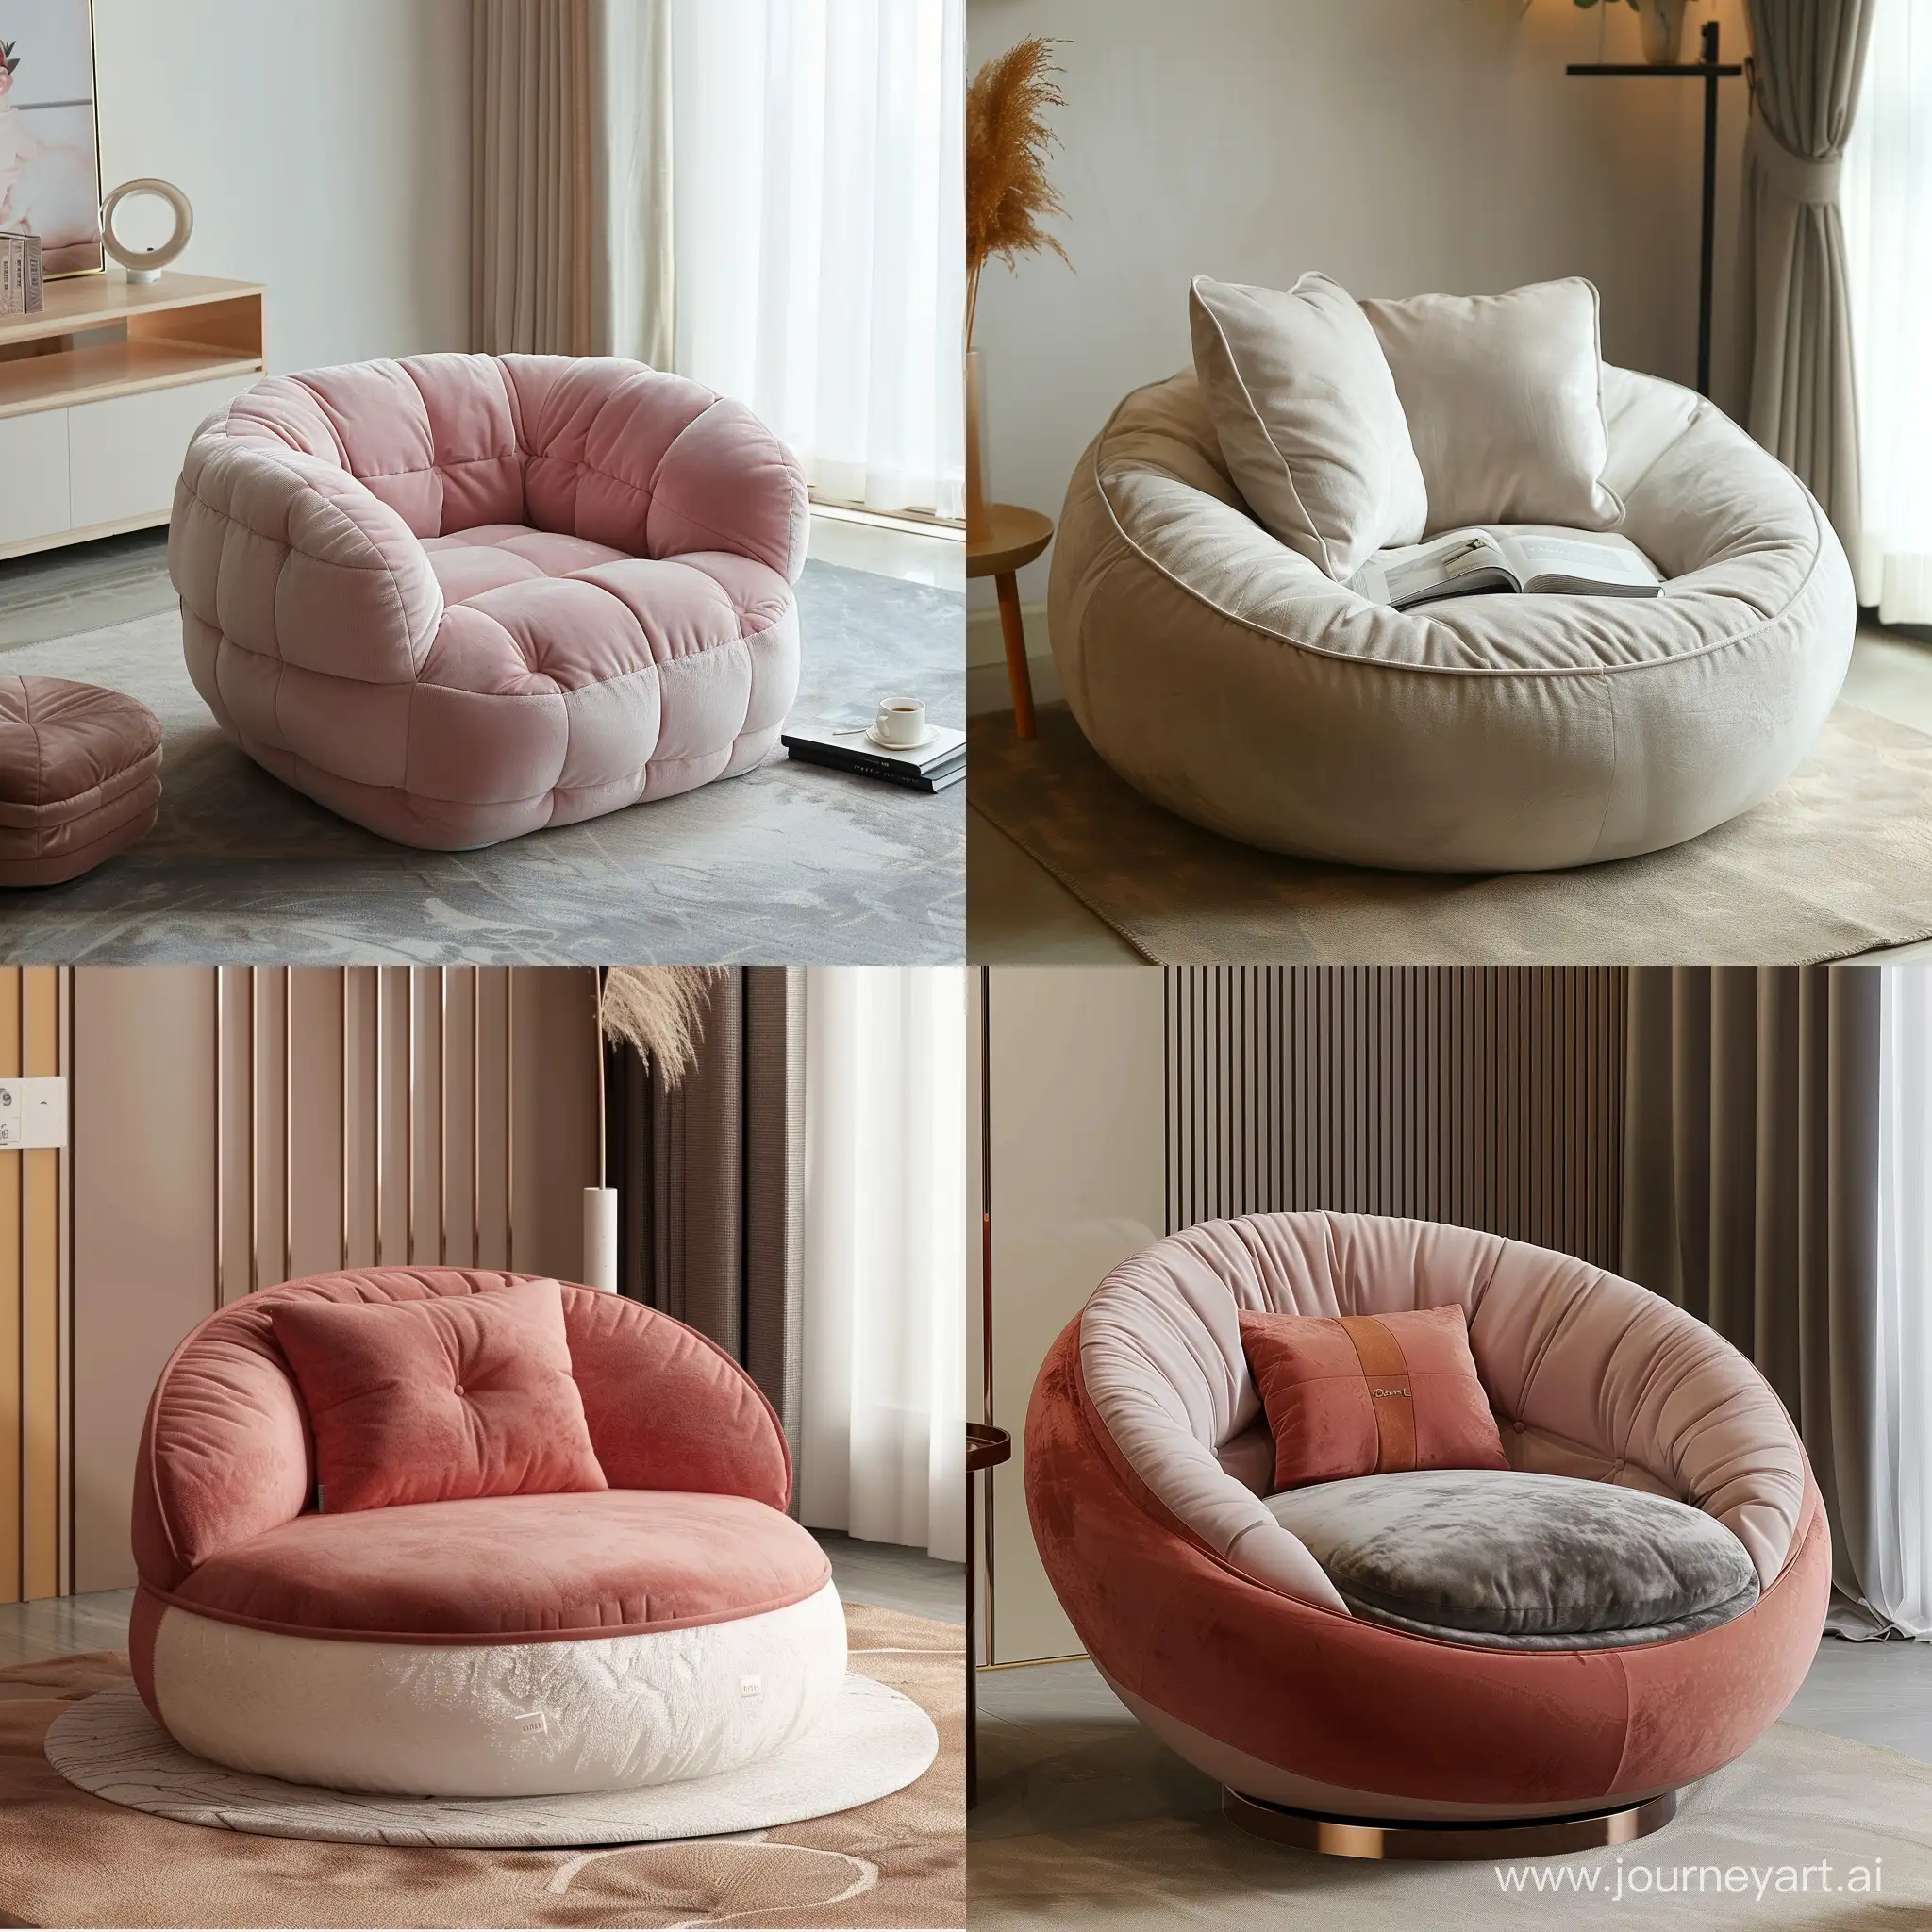 Cute style, round, light luxury lazy chair